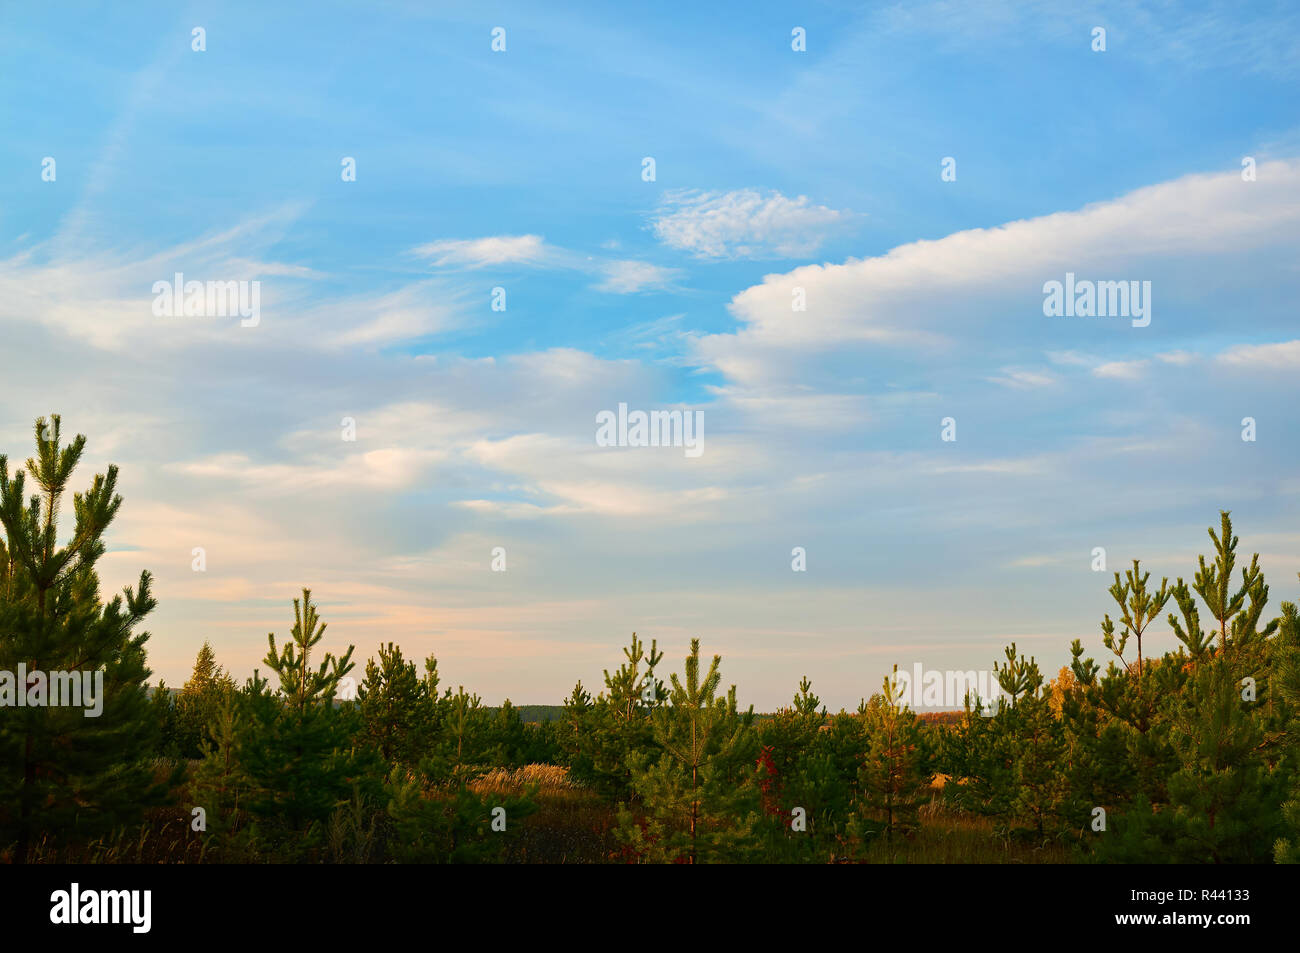 Young spruce, pine forest against the blue sky with clouds. Stock Photo